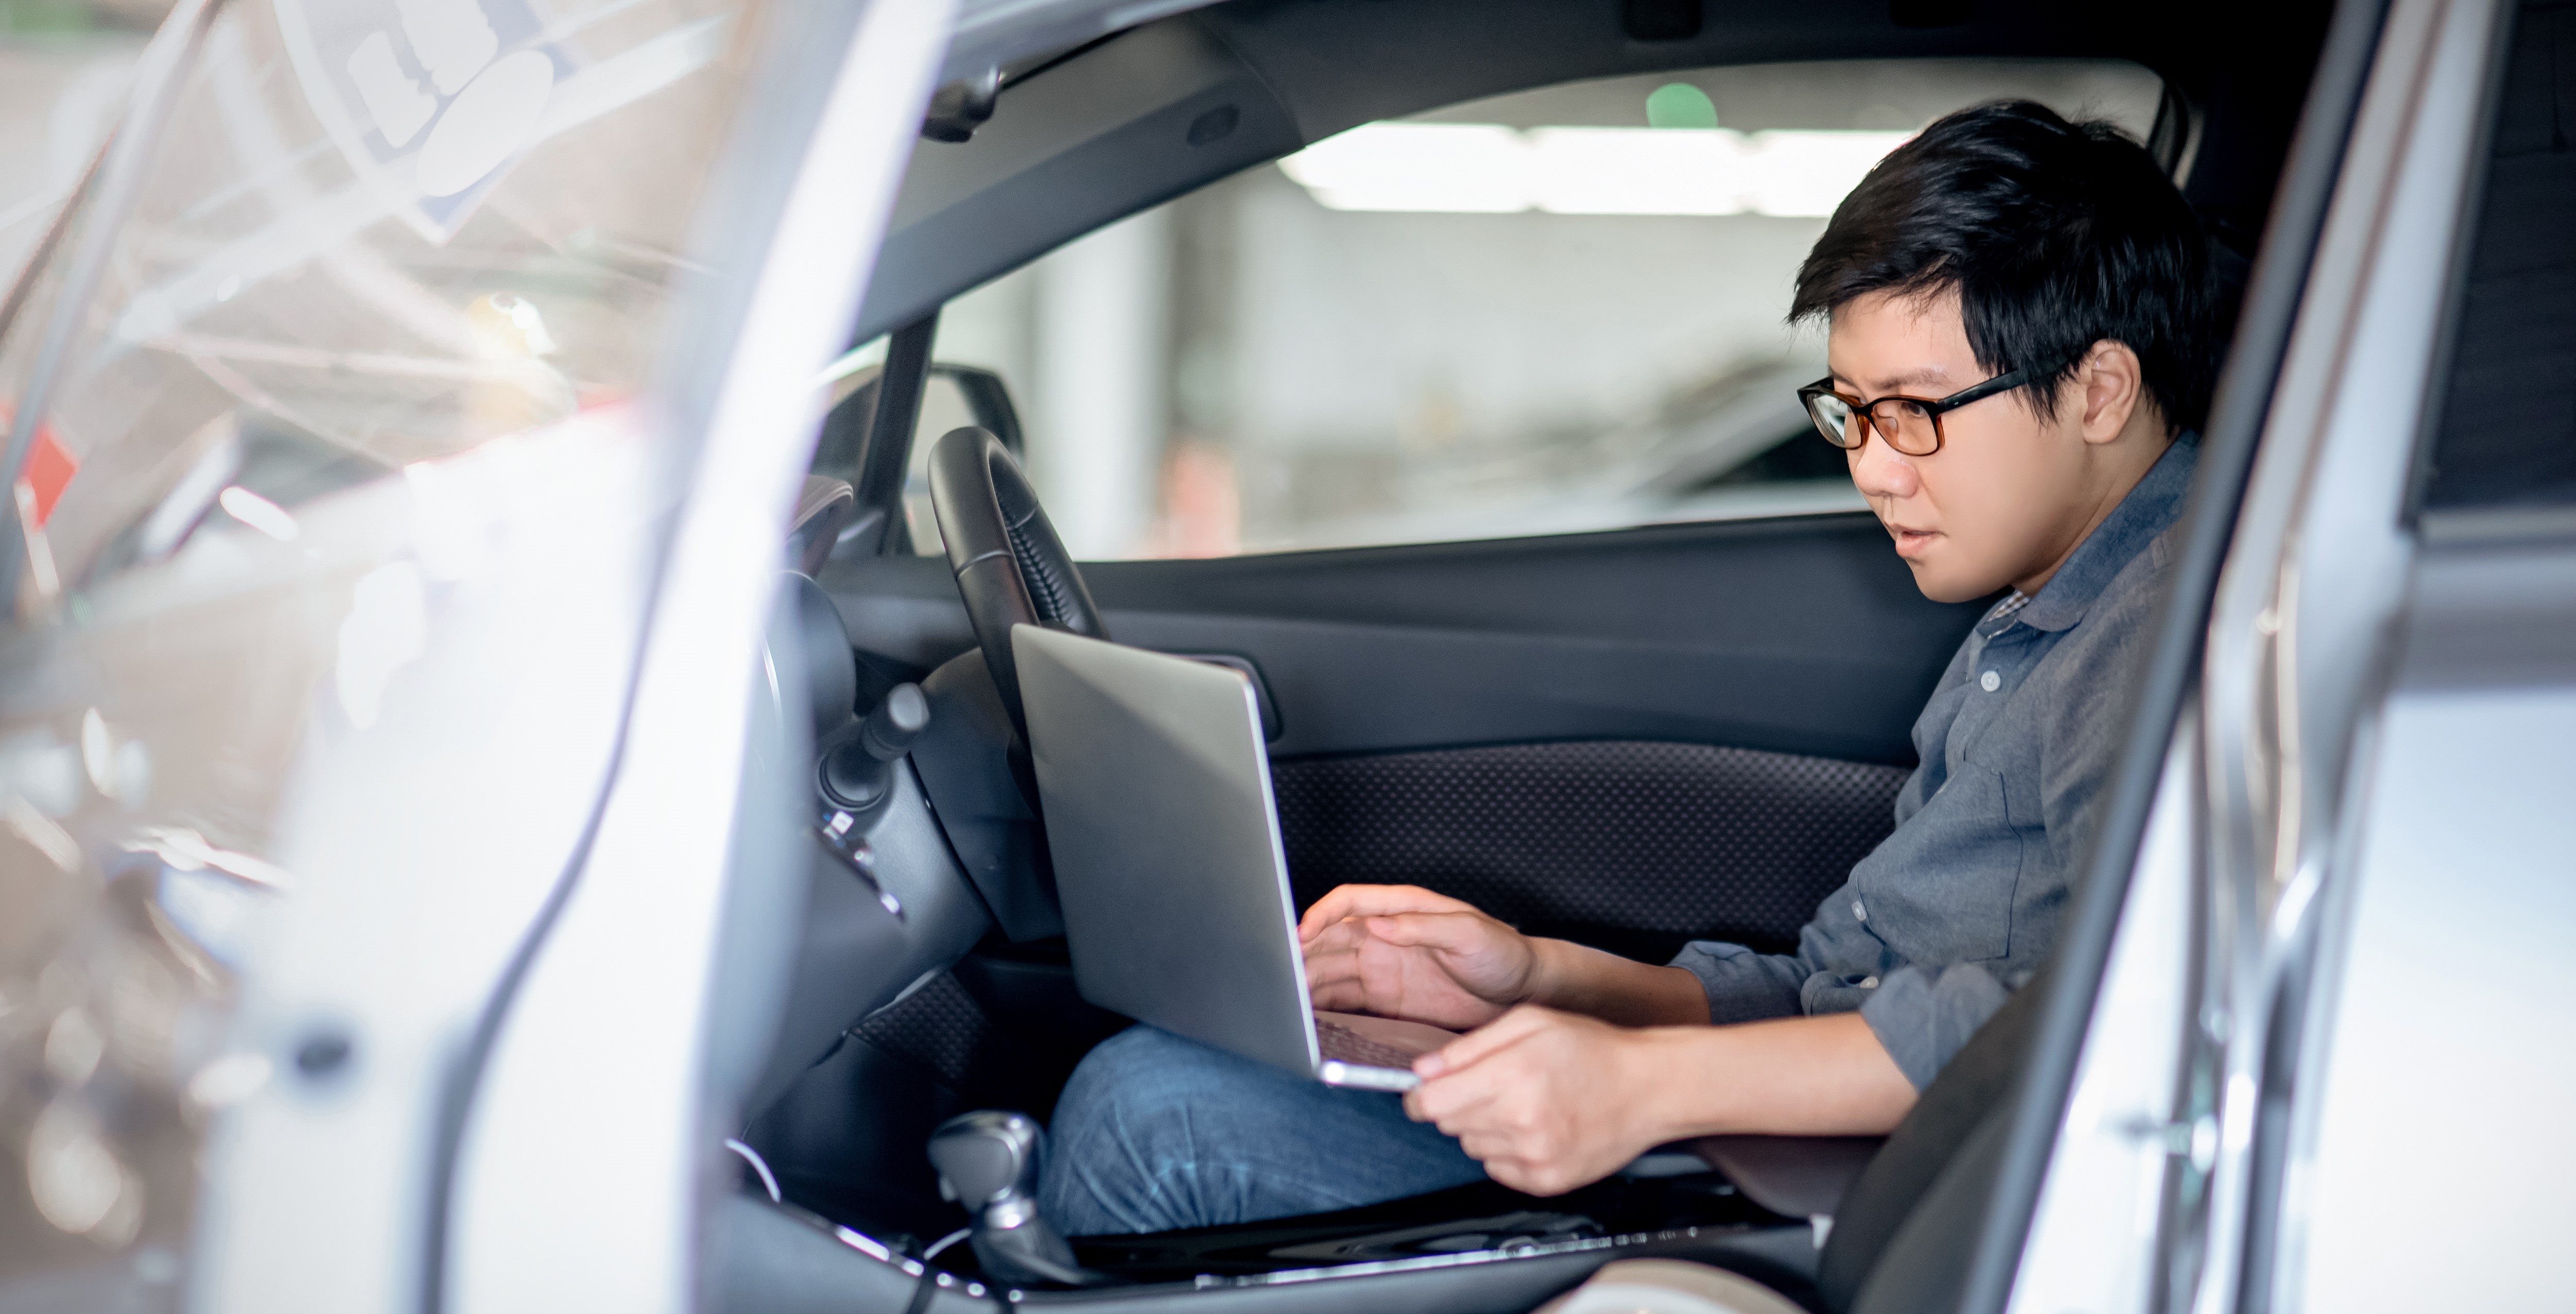 Huf job offer asian engineer working in car with notebook